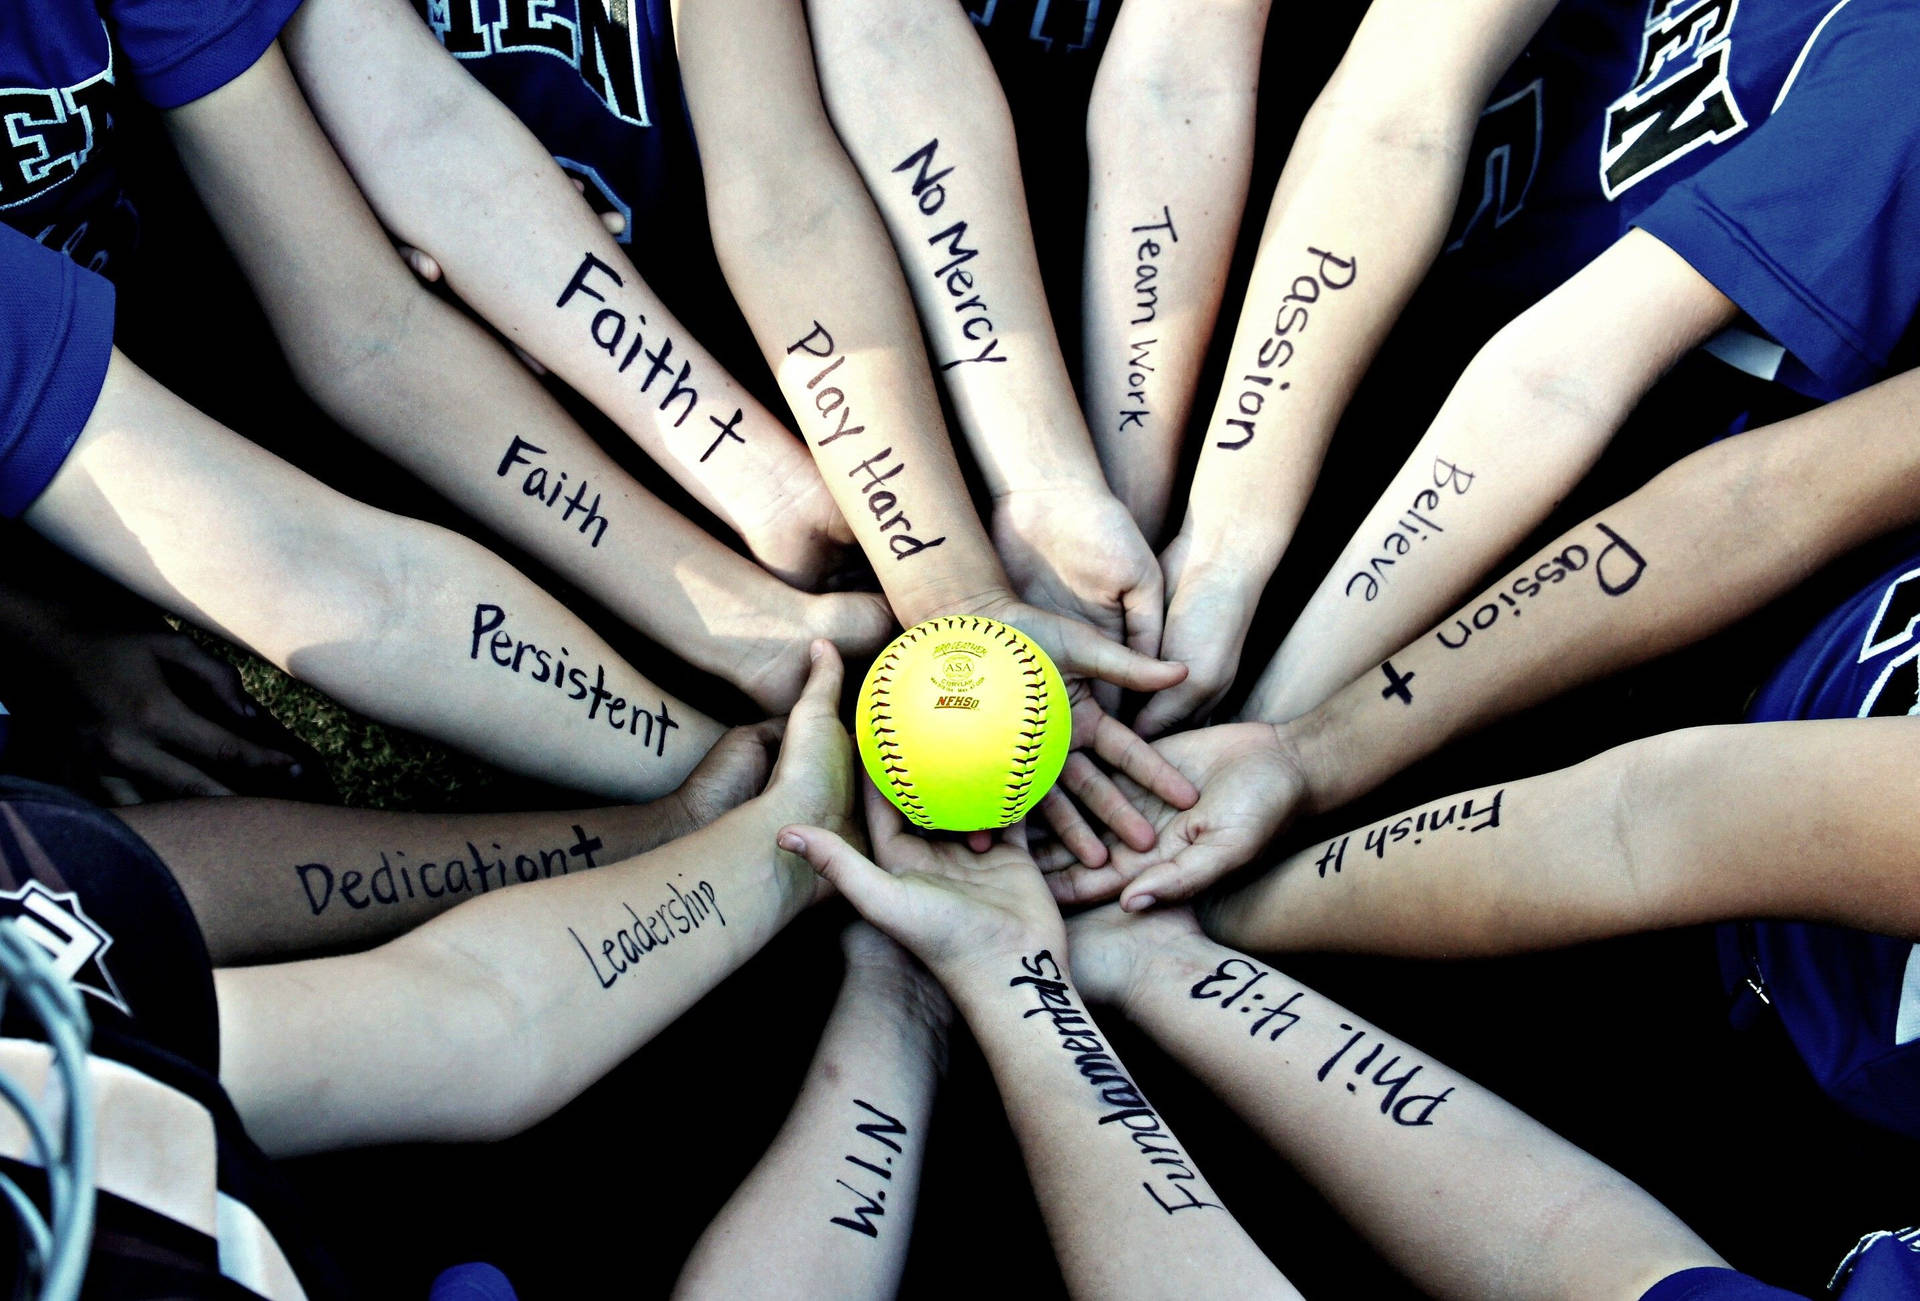 Awesome Softball Values Wallpaper